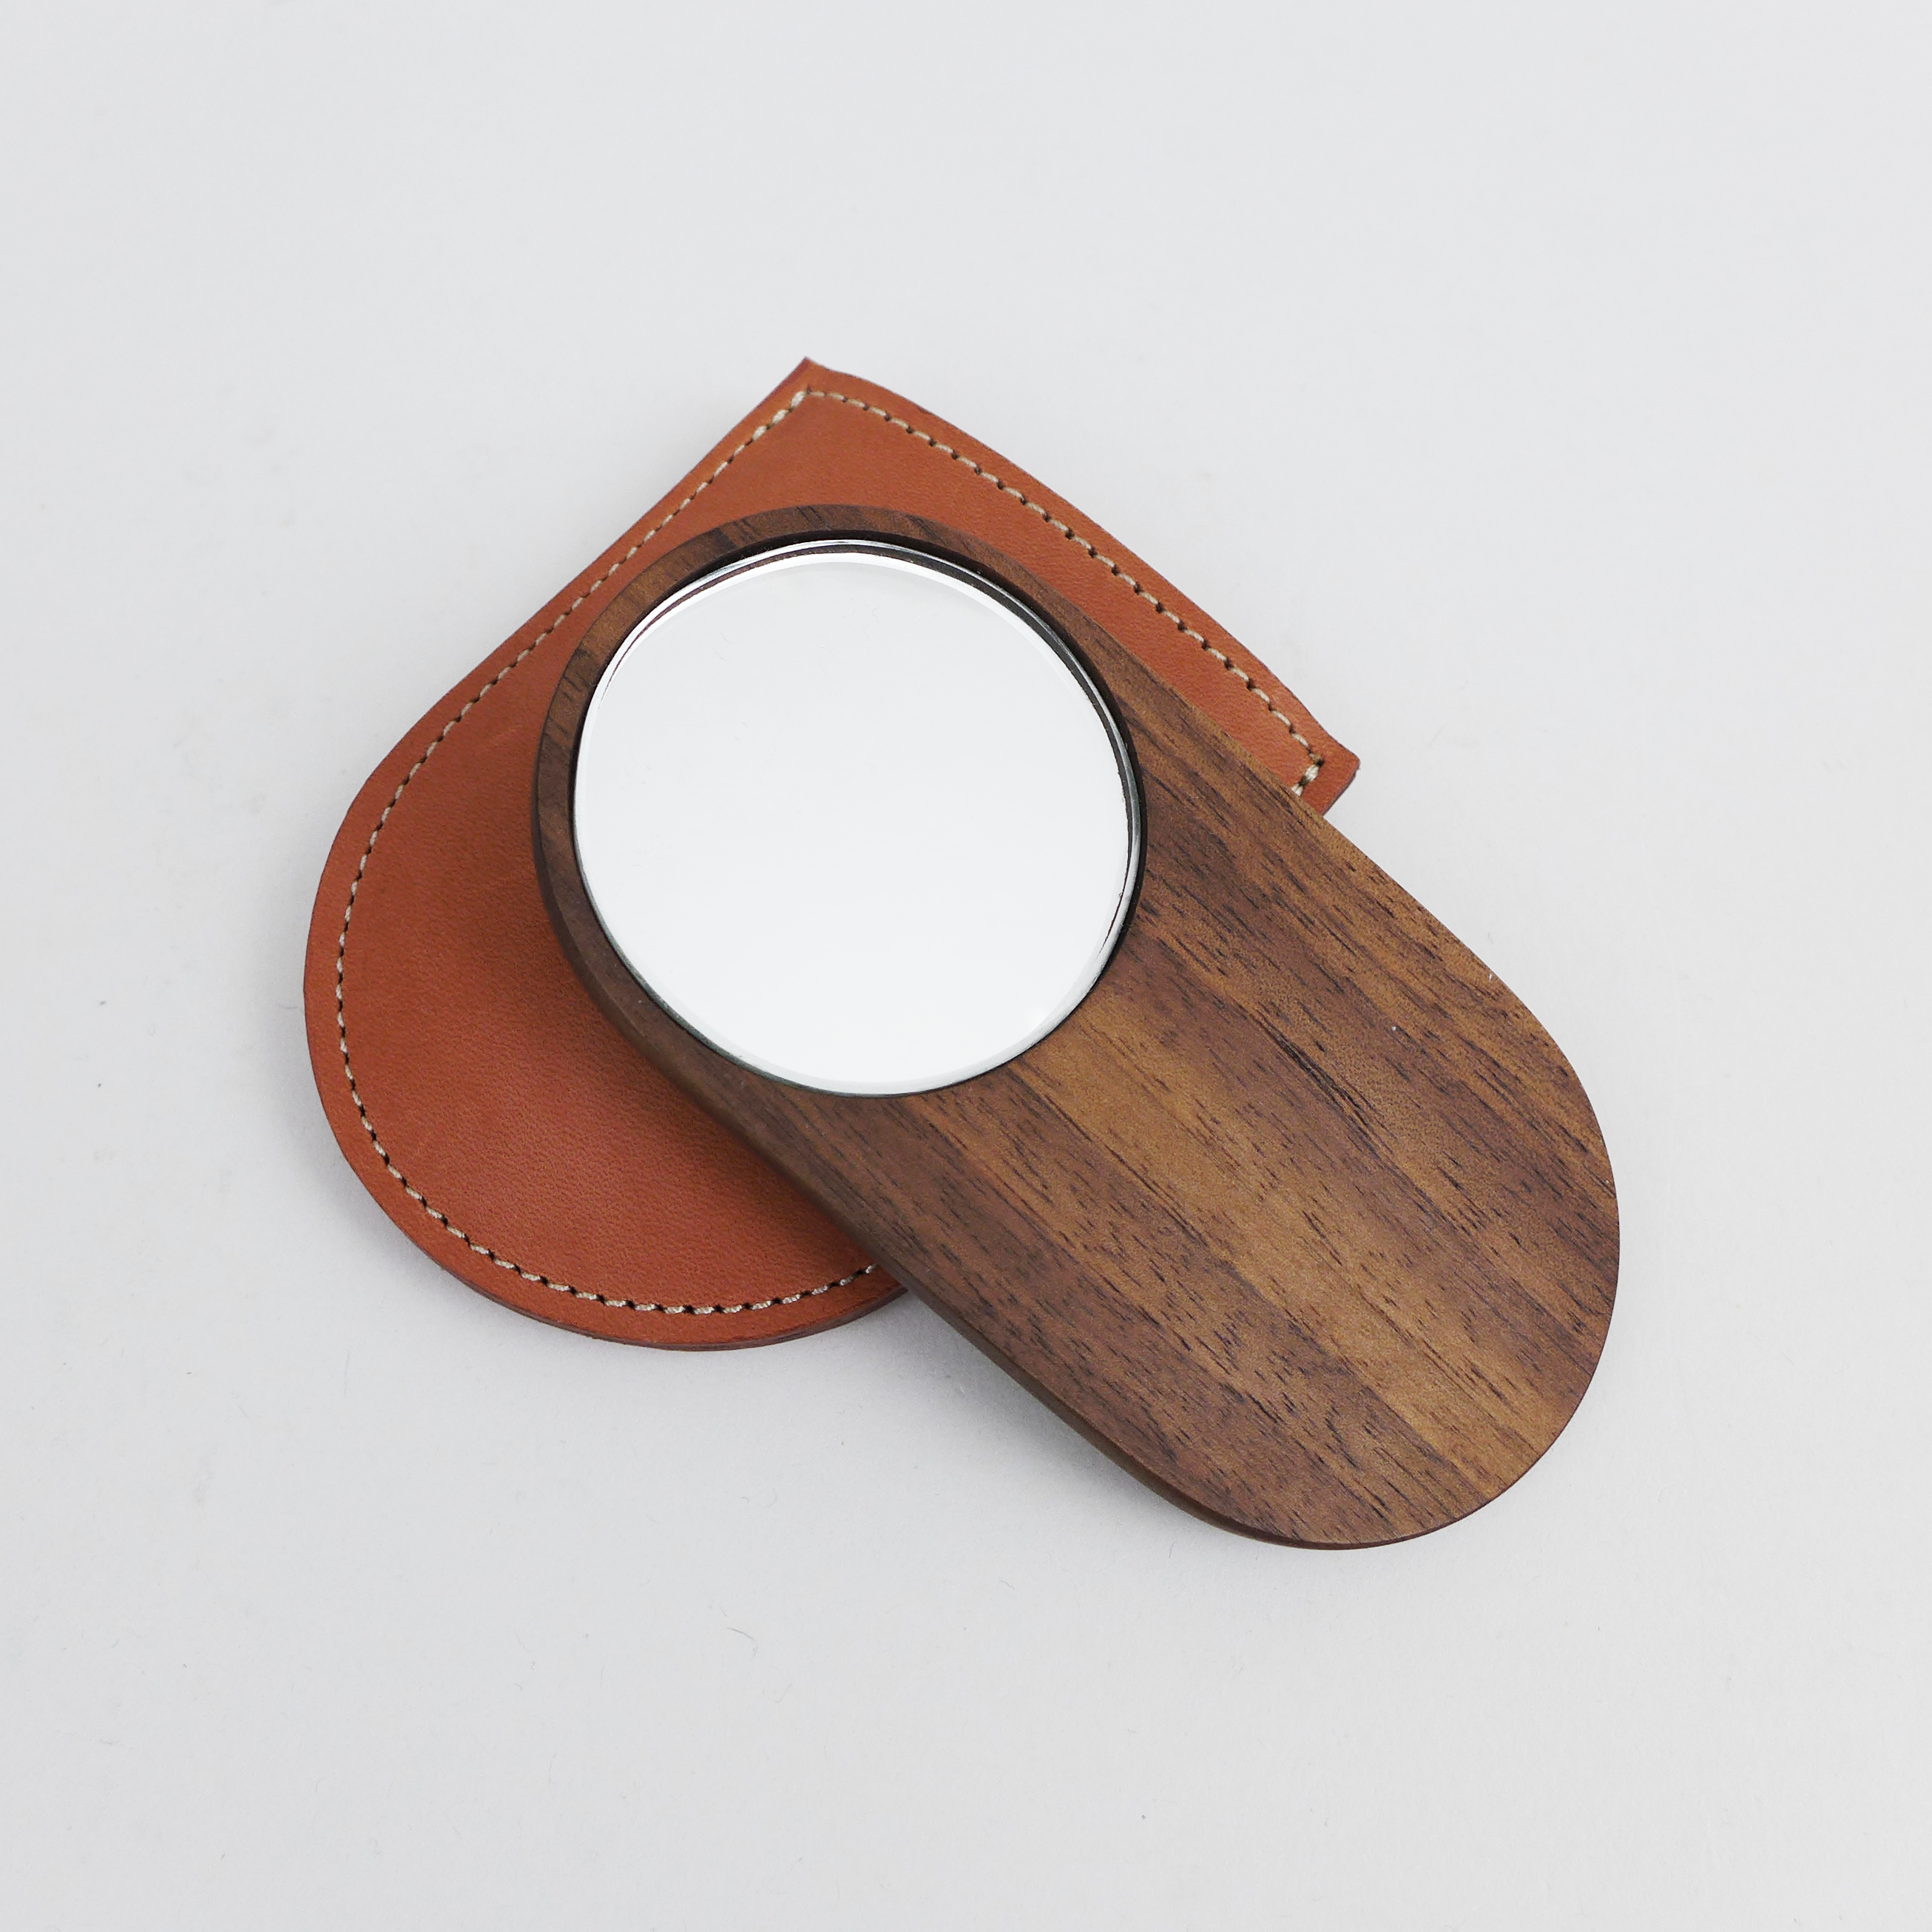 Shaped from solid walnut, these small mirrors are designed to sit comfortably in your hand by Heide Martin at the Center for Art in Wood